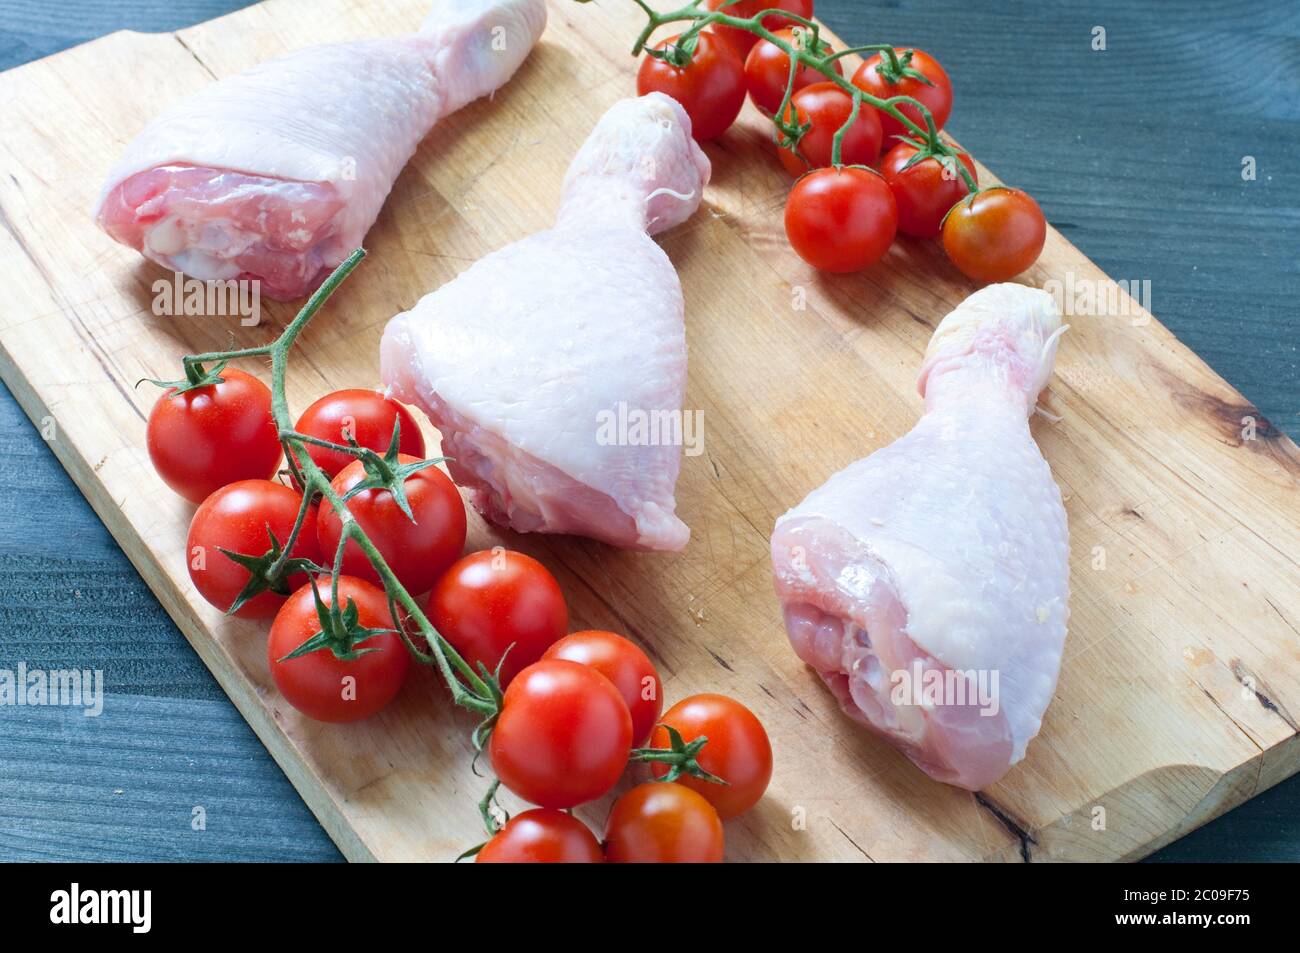 Various fresh meats of chicken and pork with tomatoes Stock Photo